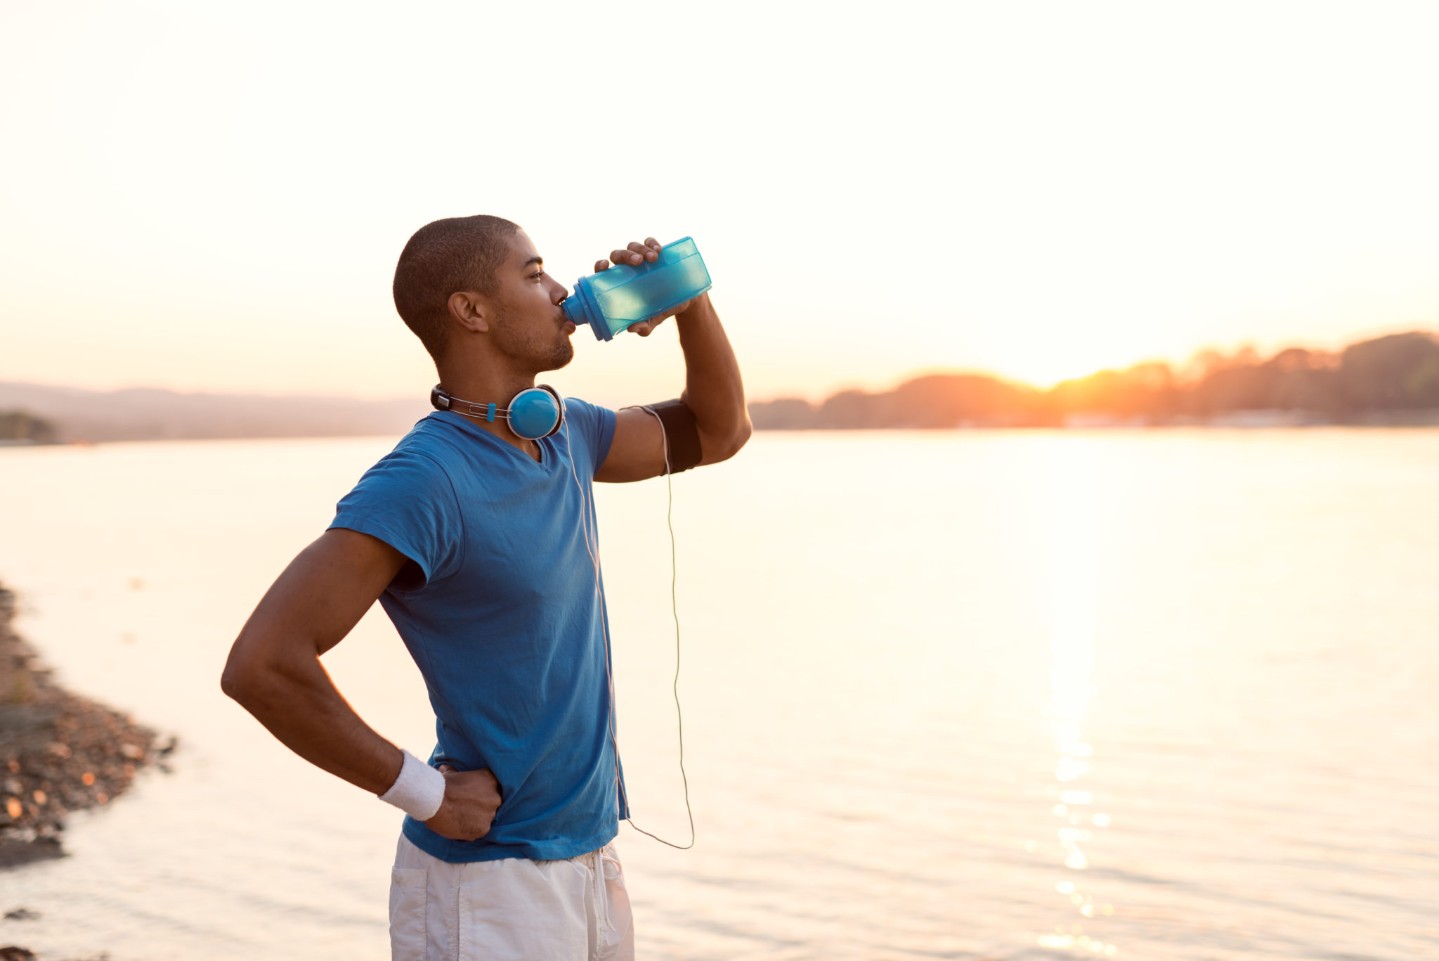 Cropped shot of a young sportsman drinking water while running on riverbank. Warm sunset tones.||Infographic explaining the symptoms of dehydration including thirst, dry mouth, muscle cramps, fast heart rate, fatigue, headache and dizziness